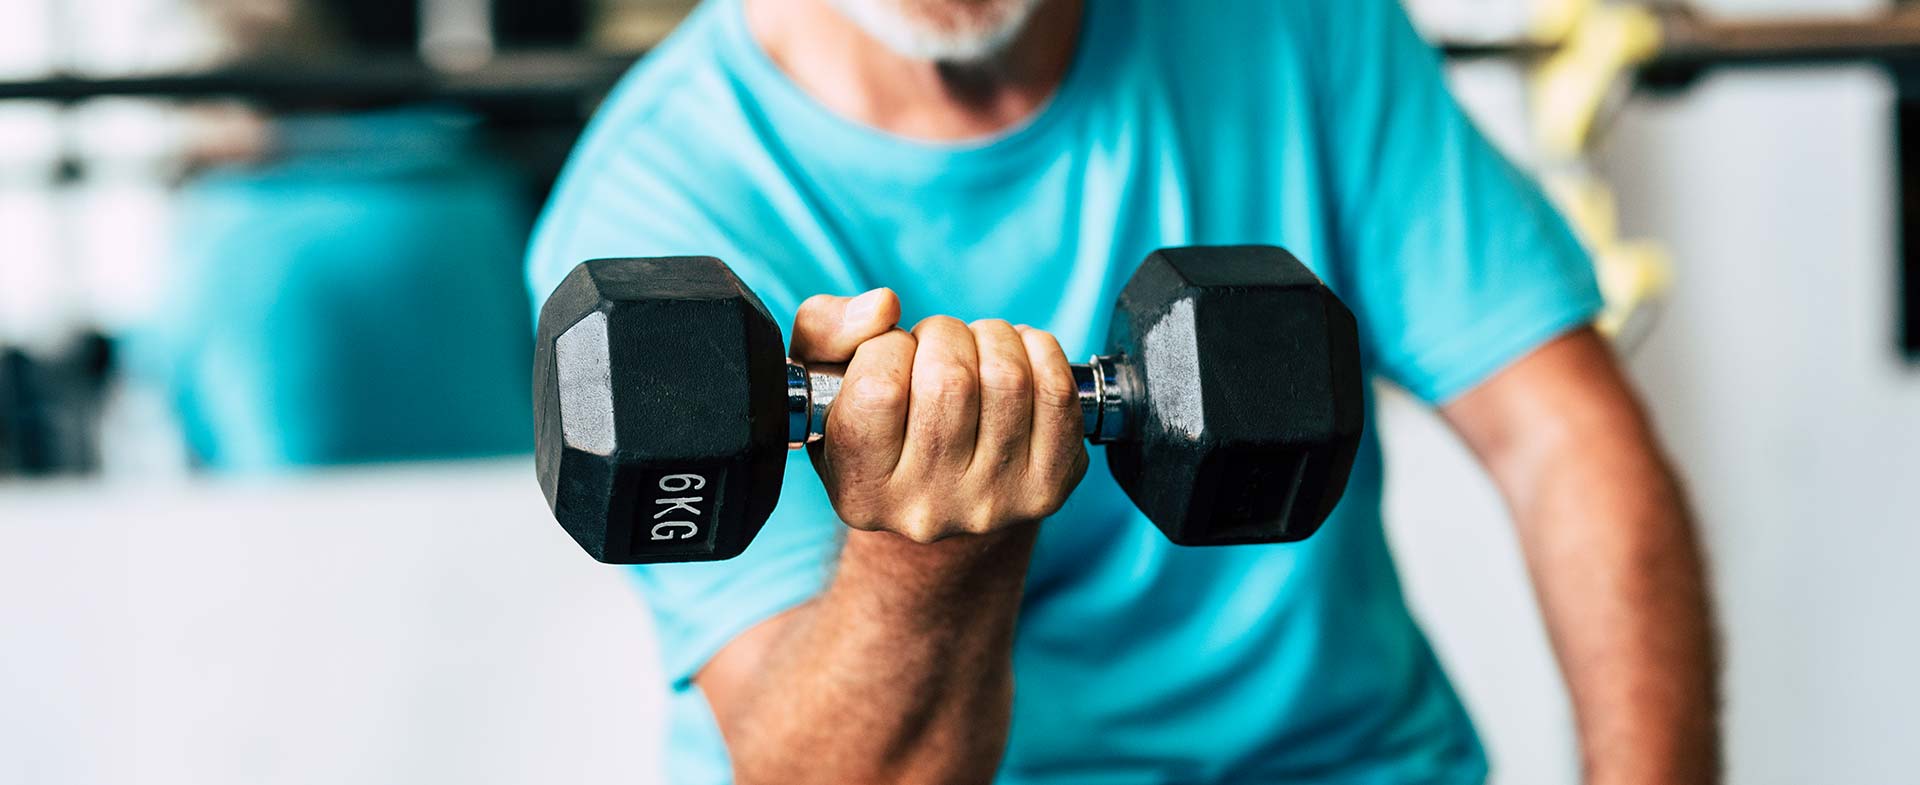 muscle mass as you age